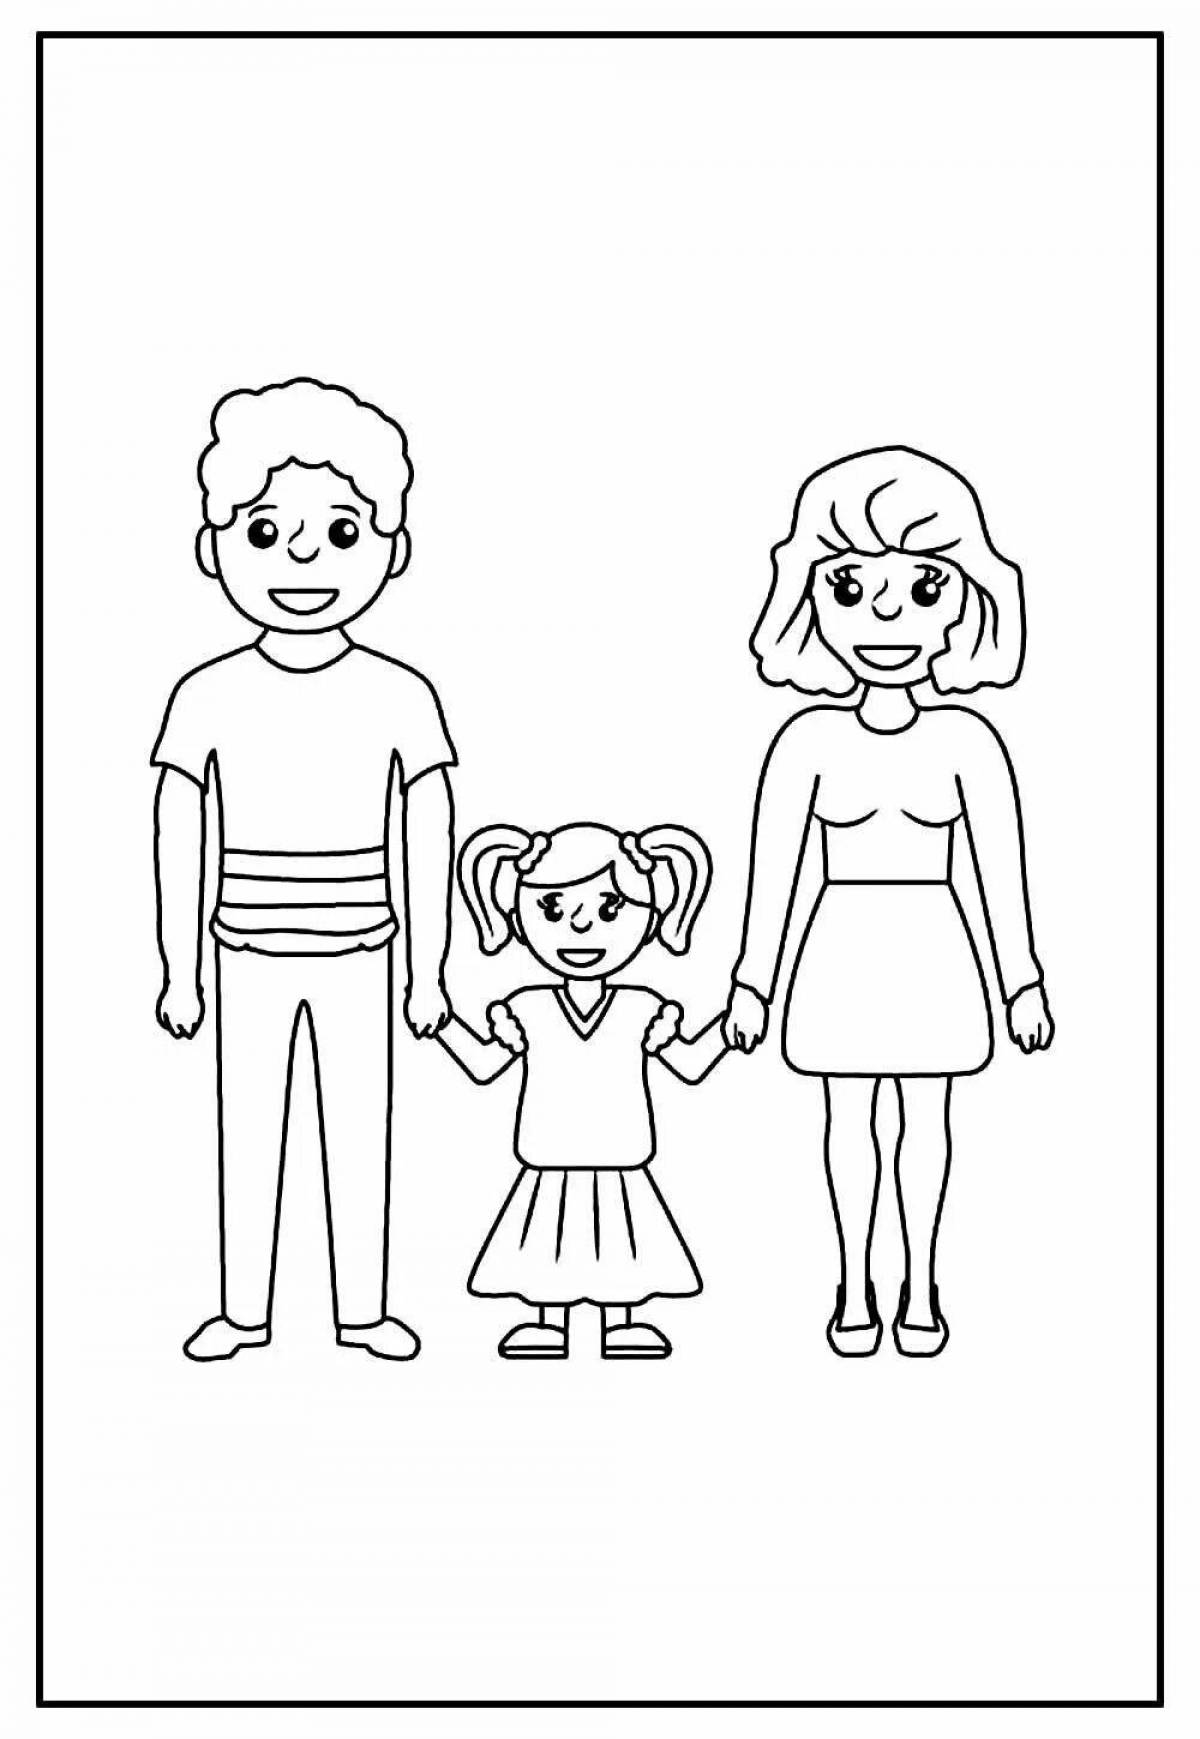 Funny family coloring book for 7 year olds